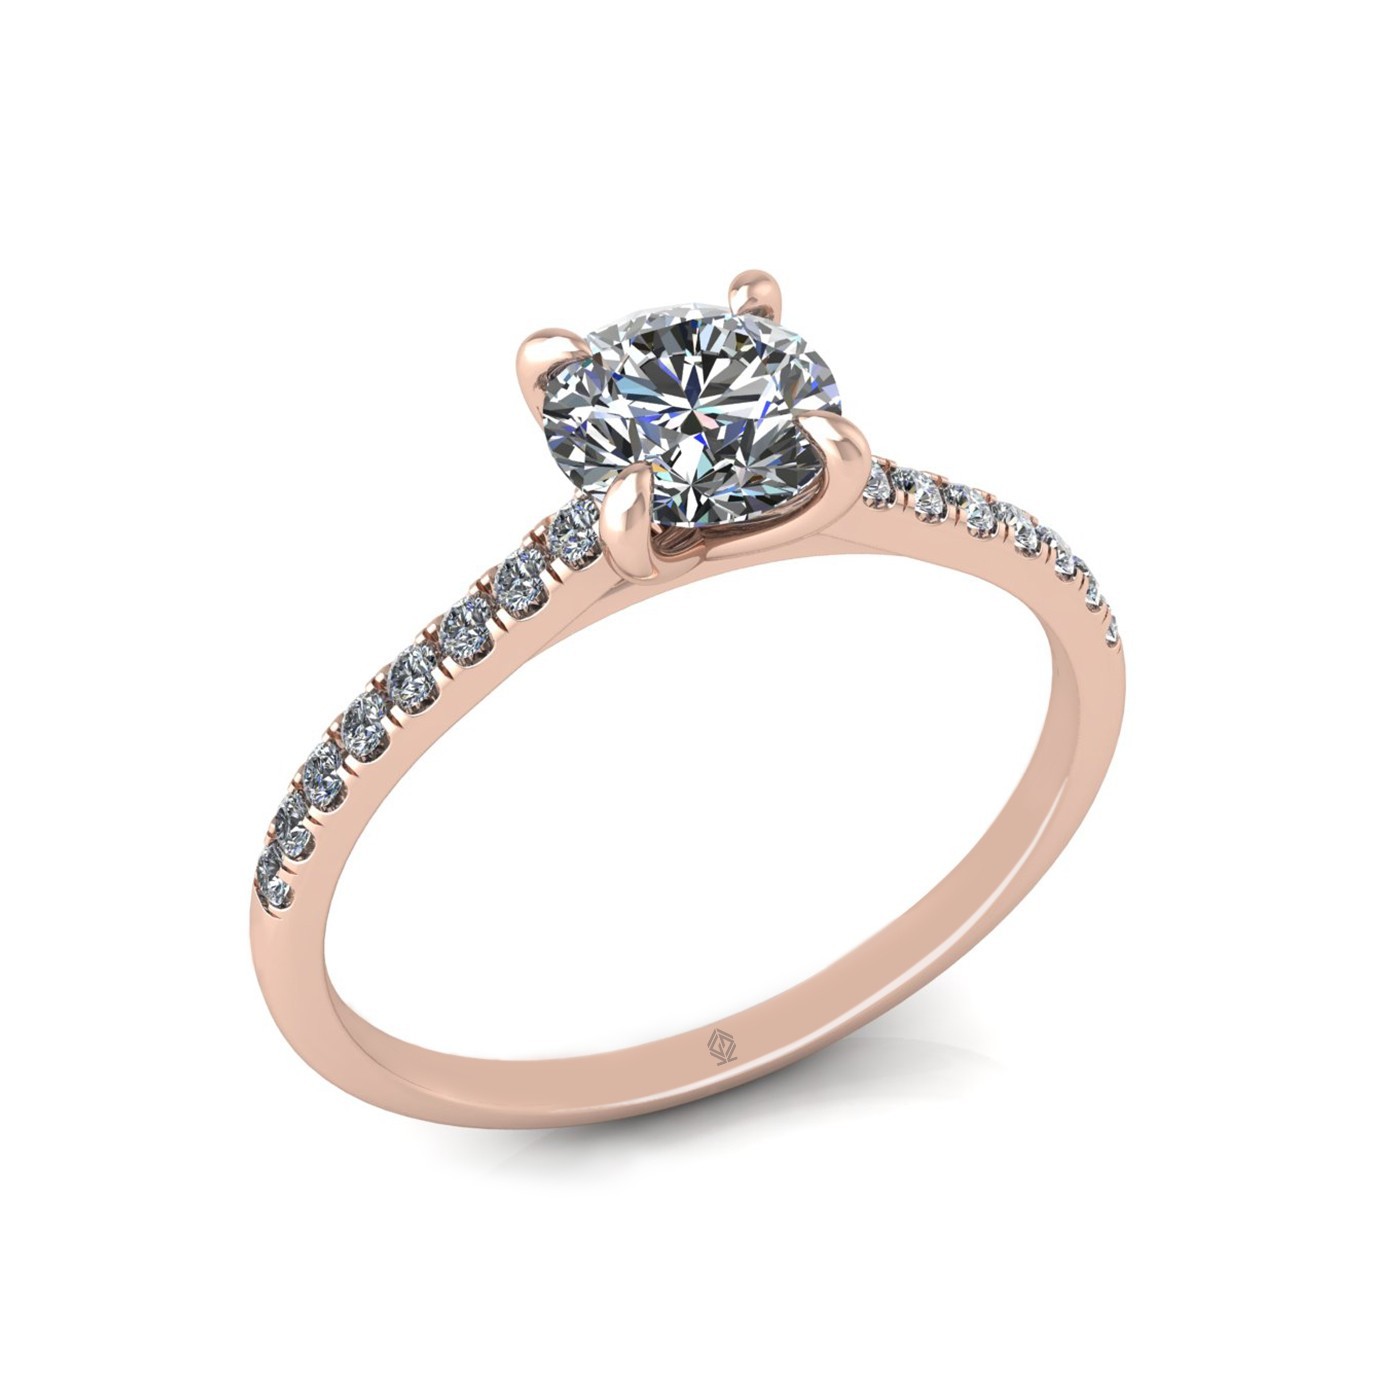 18K ROSE GOLD 4 PRONGS ROUND CUT DIAMOND ENGAGEMENT RING WITH WHISPER THIN PAVÉ SET BAND